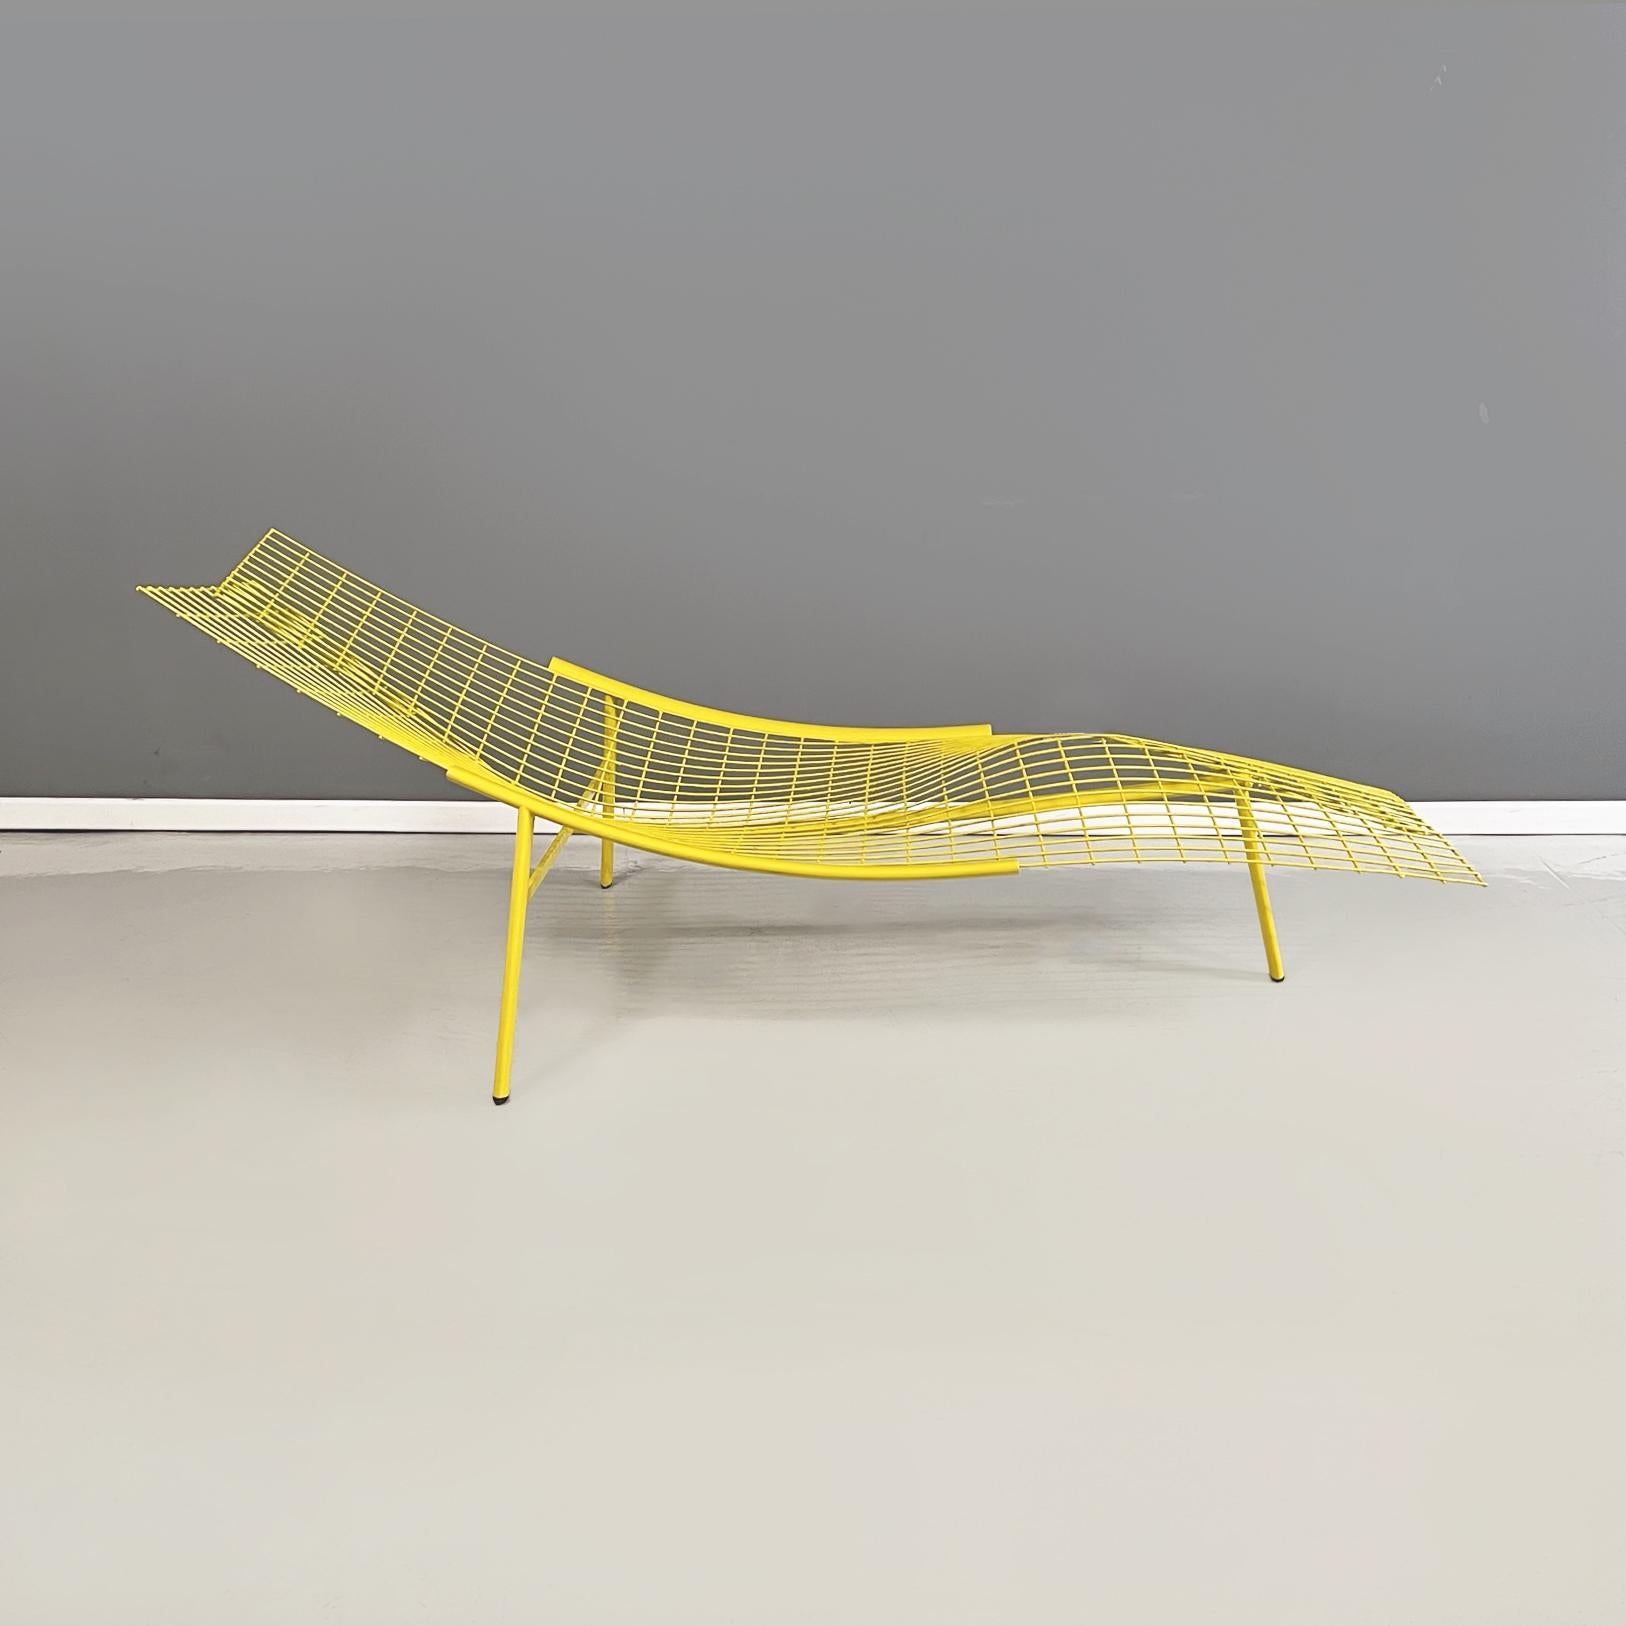 Italian modern Yellow metal Deck chair Swing Rete by Offredi for Saporiti, 1980s In Good Condition For Sale In MIlano, IT